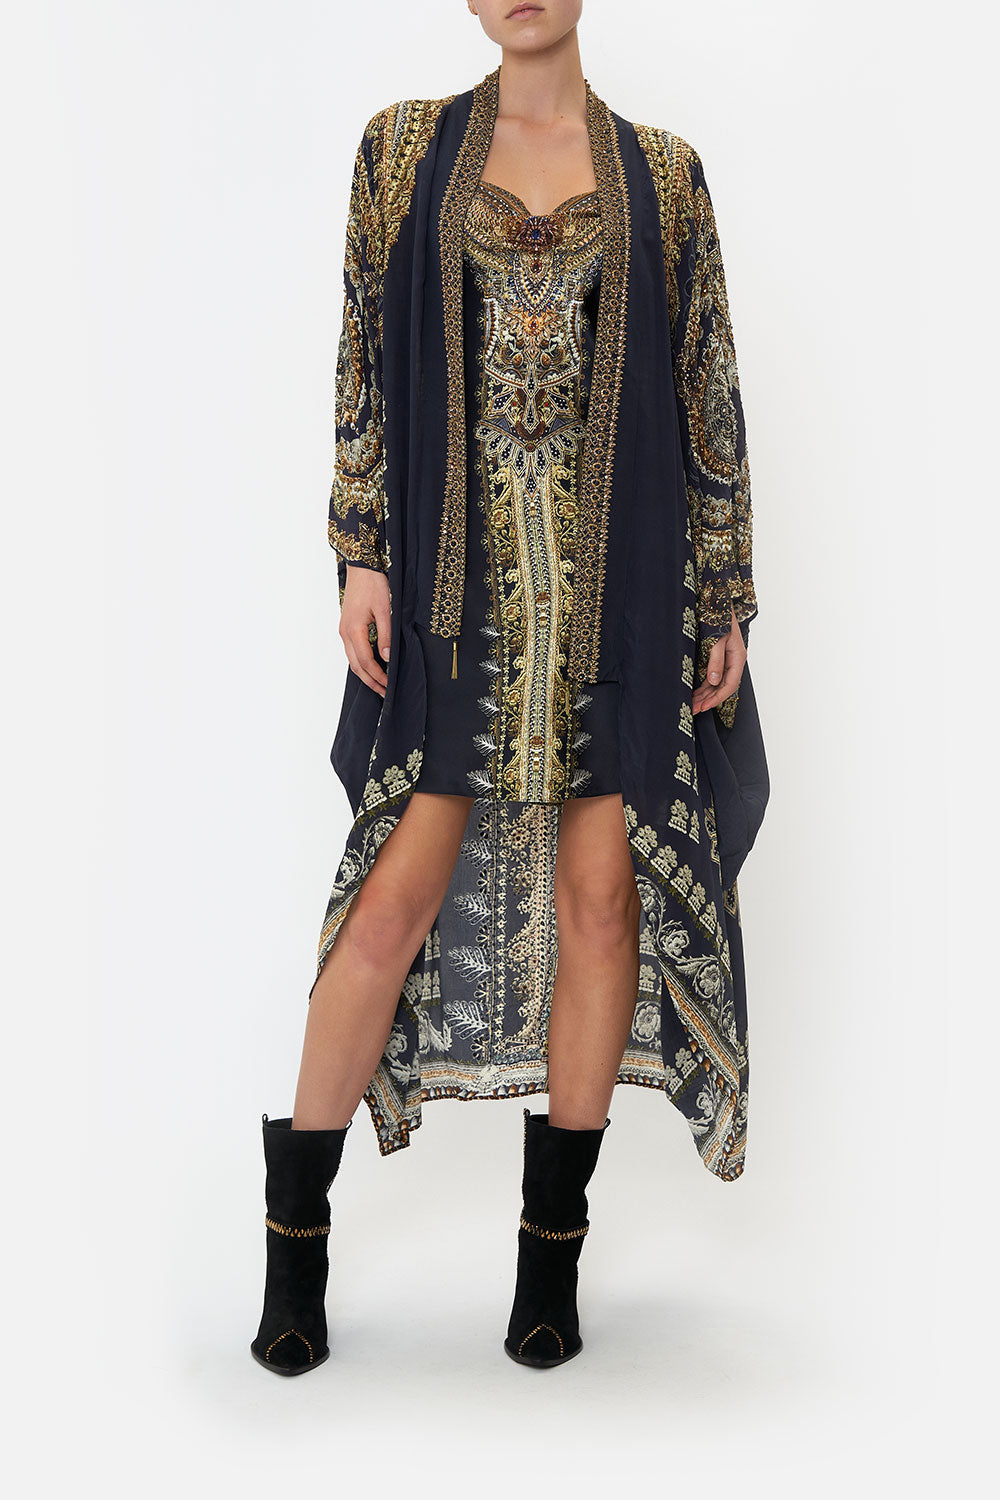 LUXE LAYER WITH KIMONO COLLAR ITS ALL OVER TORERO